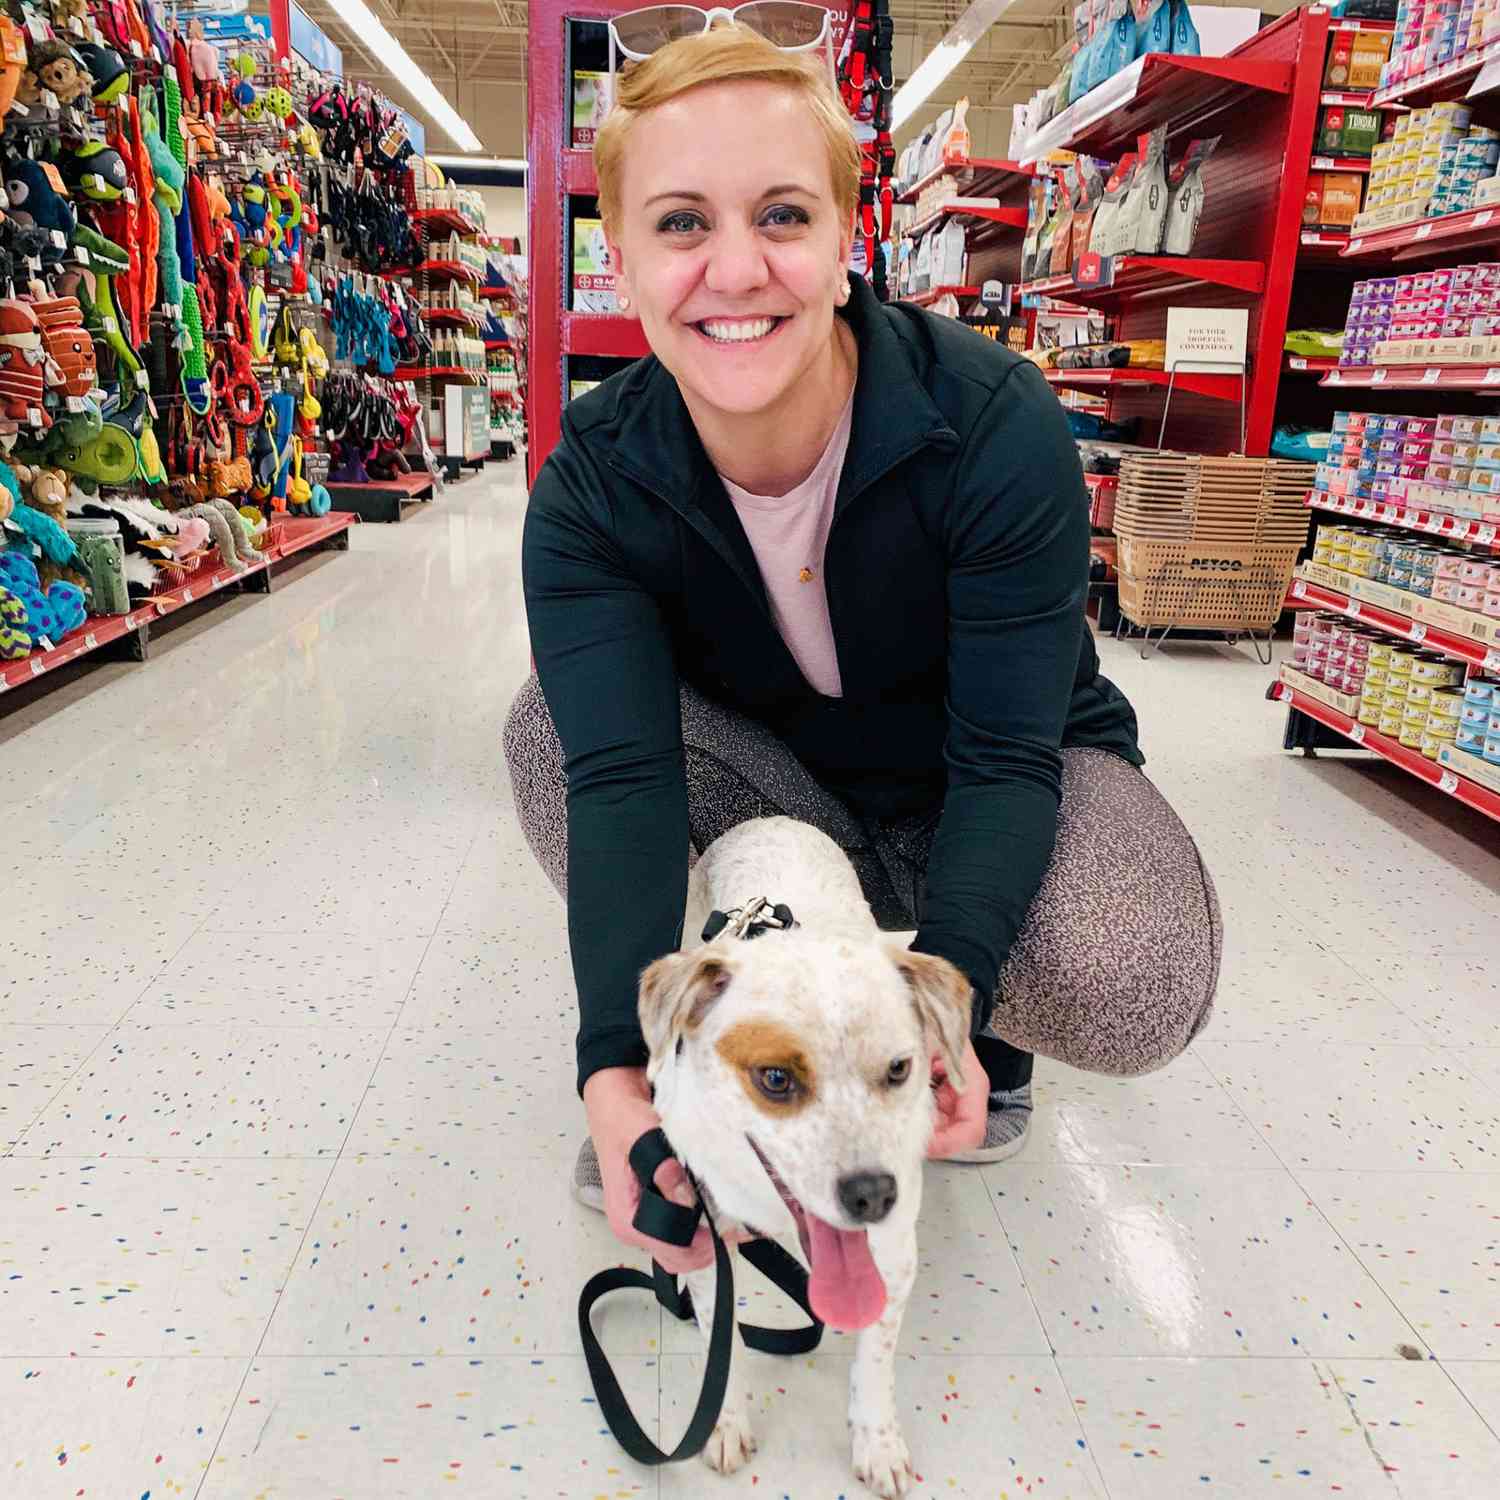 Petco dog helps owner through cancer treatment